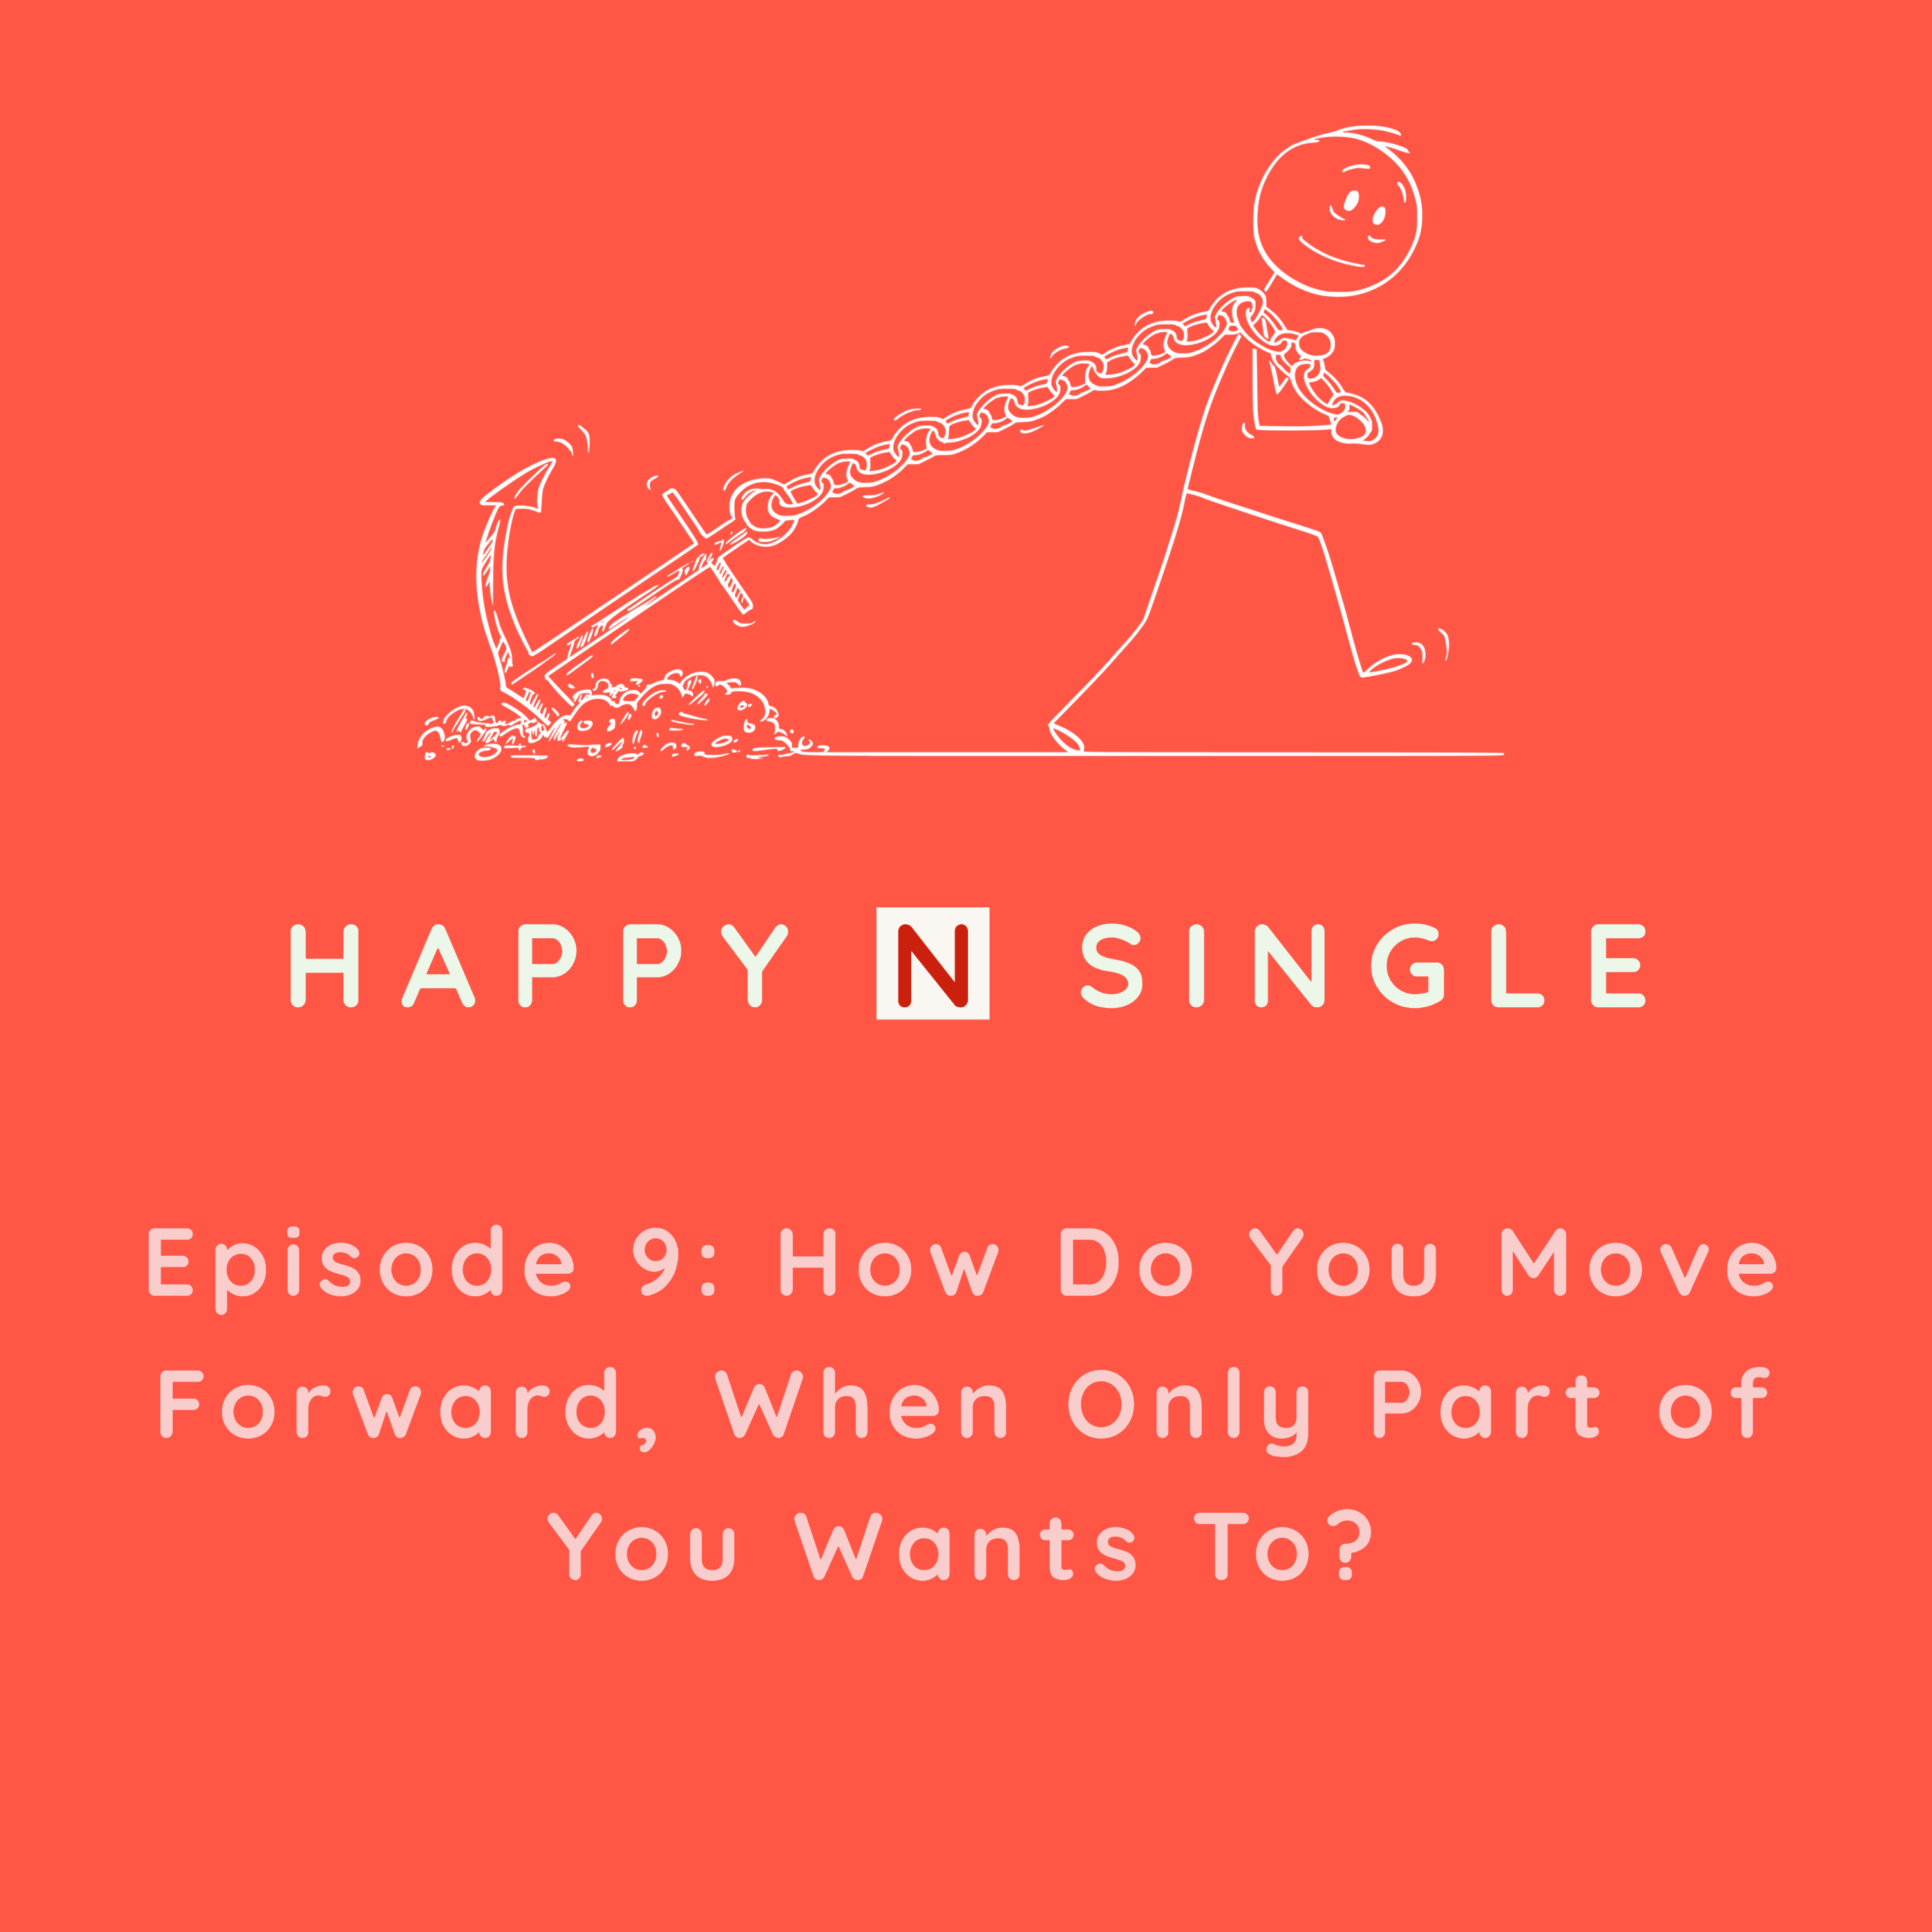 How Do You Move Forward, when only part of you wants to?